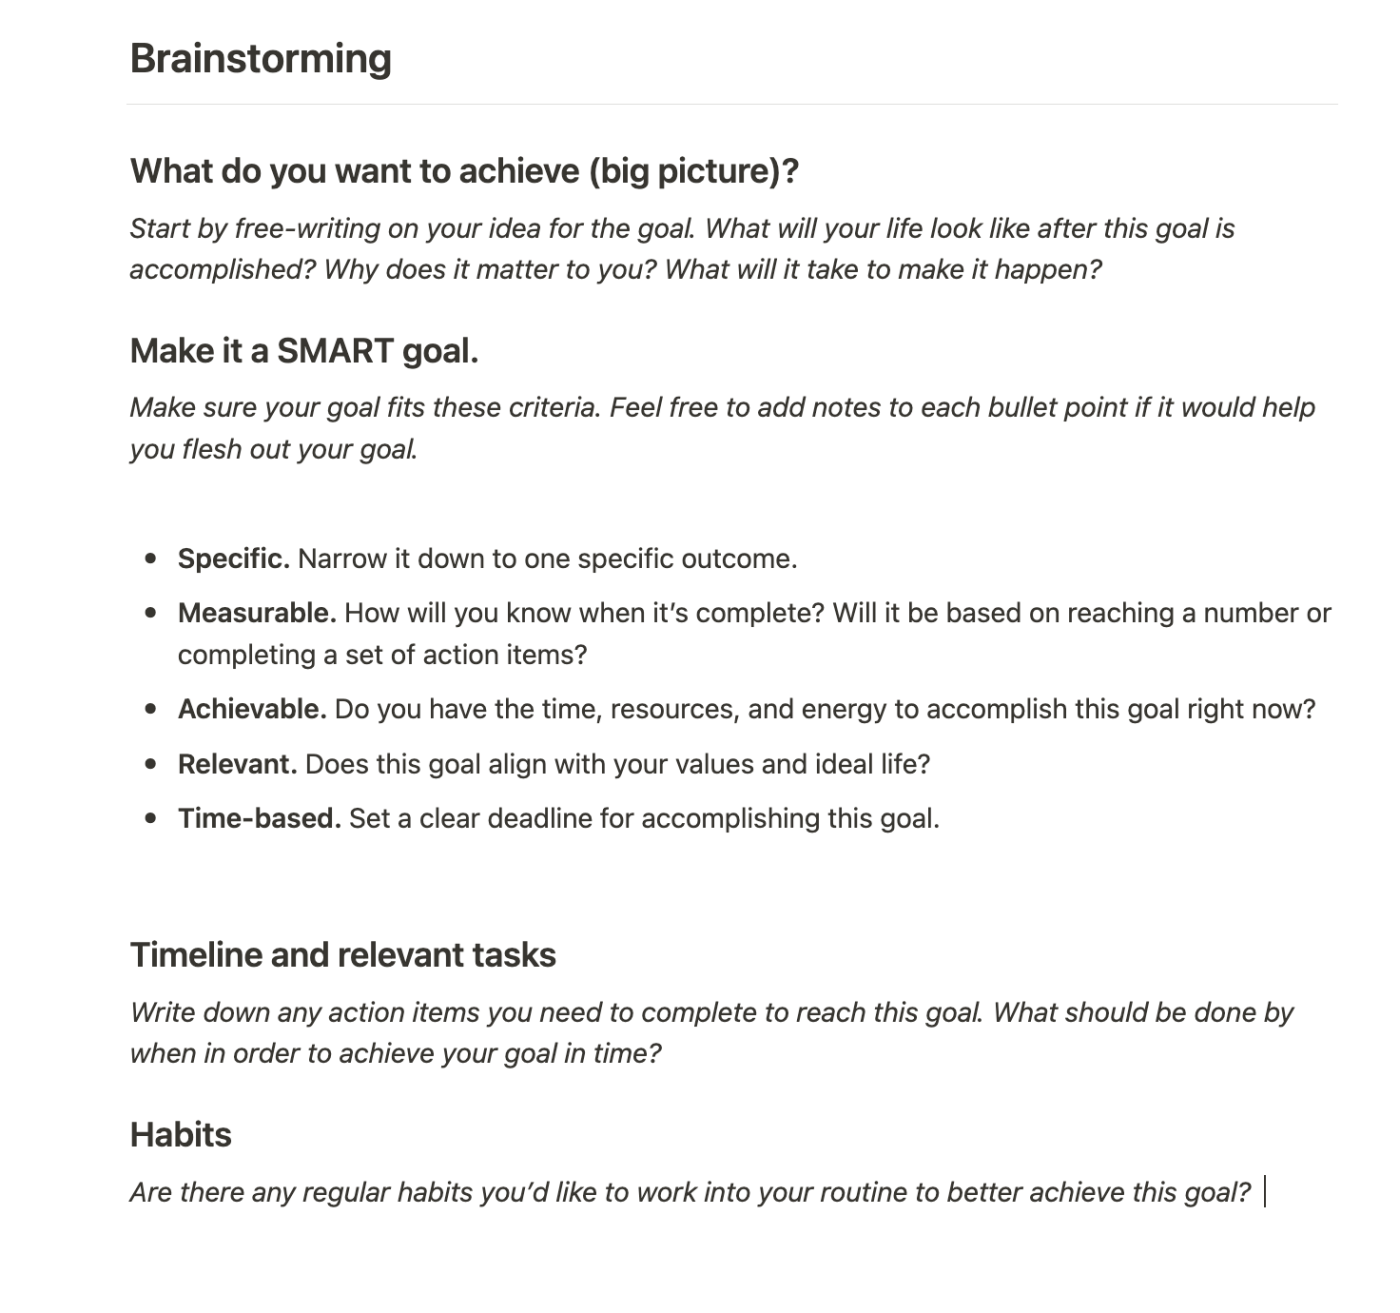 The brainstorming prompts from the Notion goal tracker template